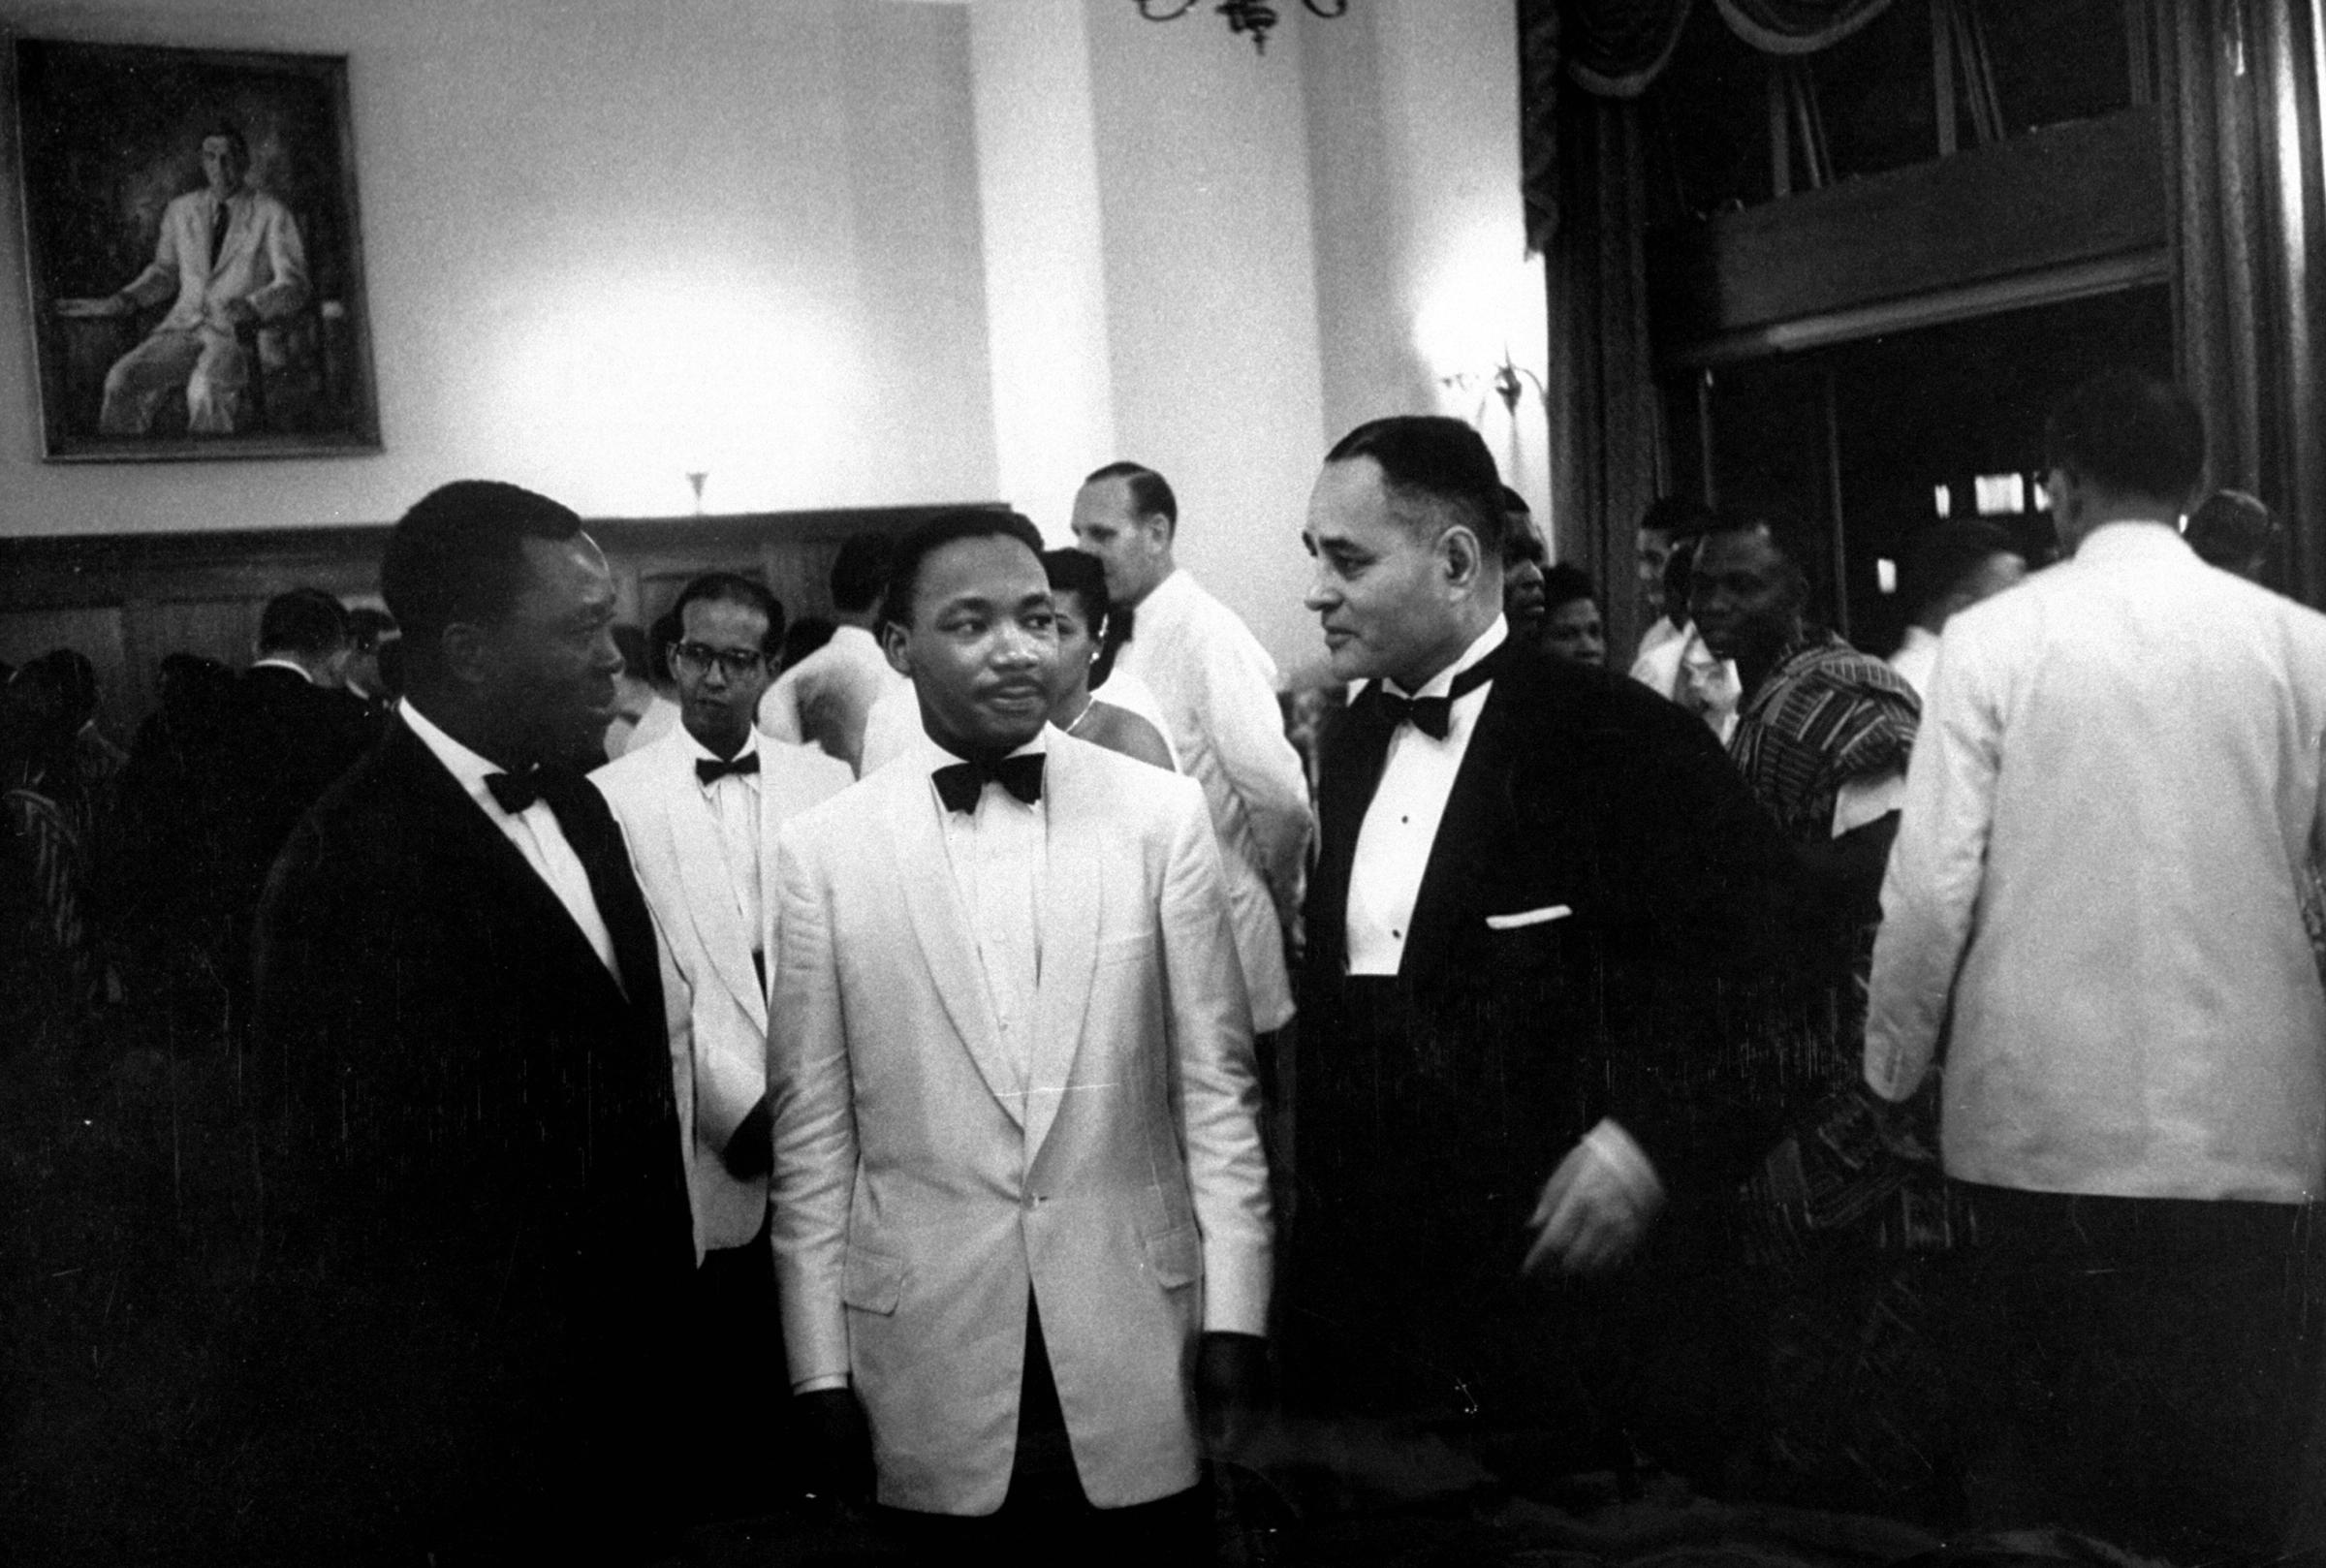 Dr. Ralph J. Bunche (R) standing with civil rights leader Rev. Martin Luther King Jr. (C) at the Ghana independence ceremonies, 1957.